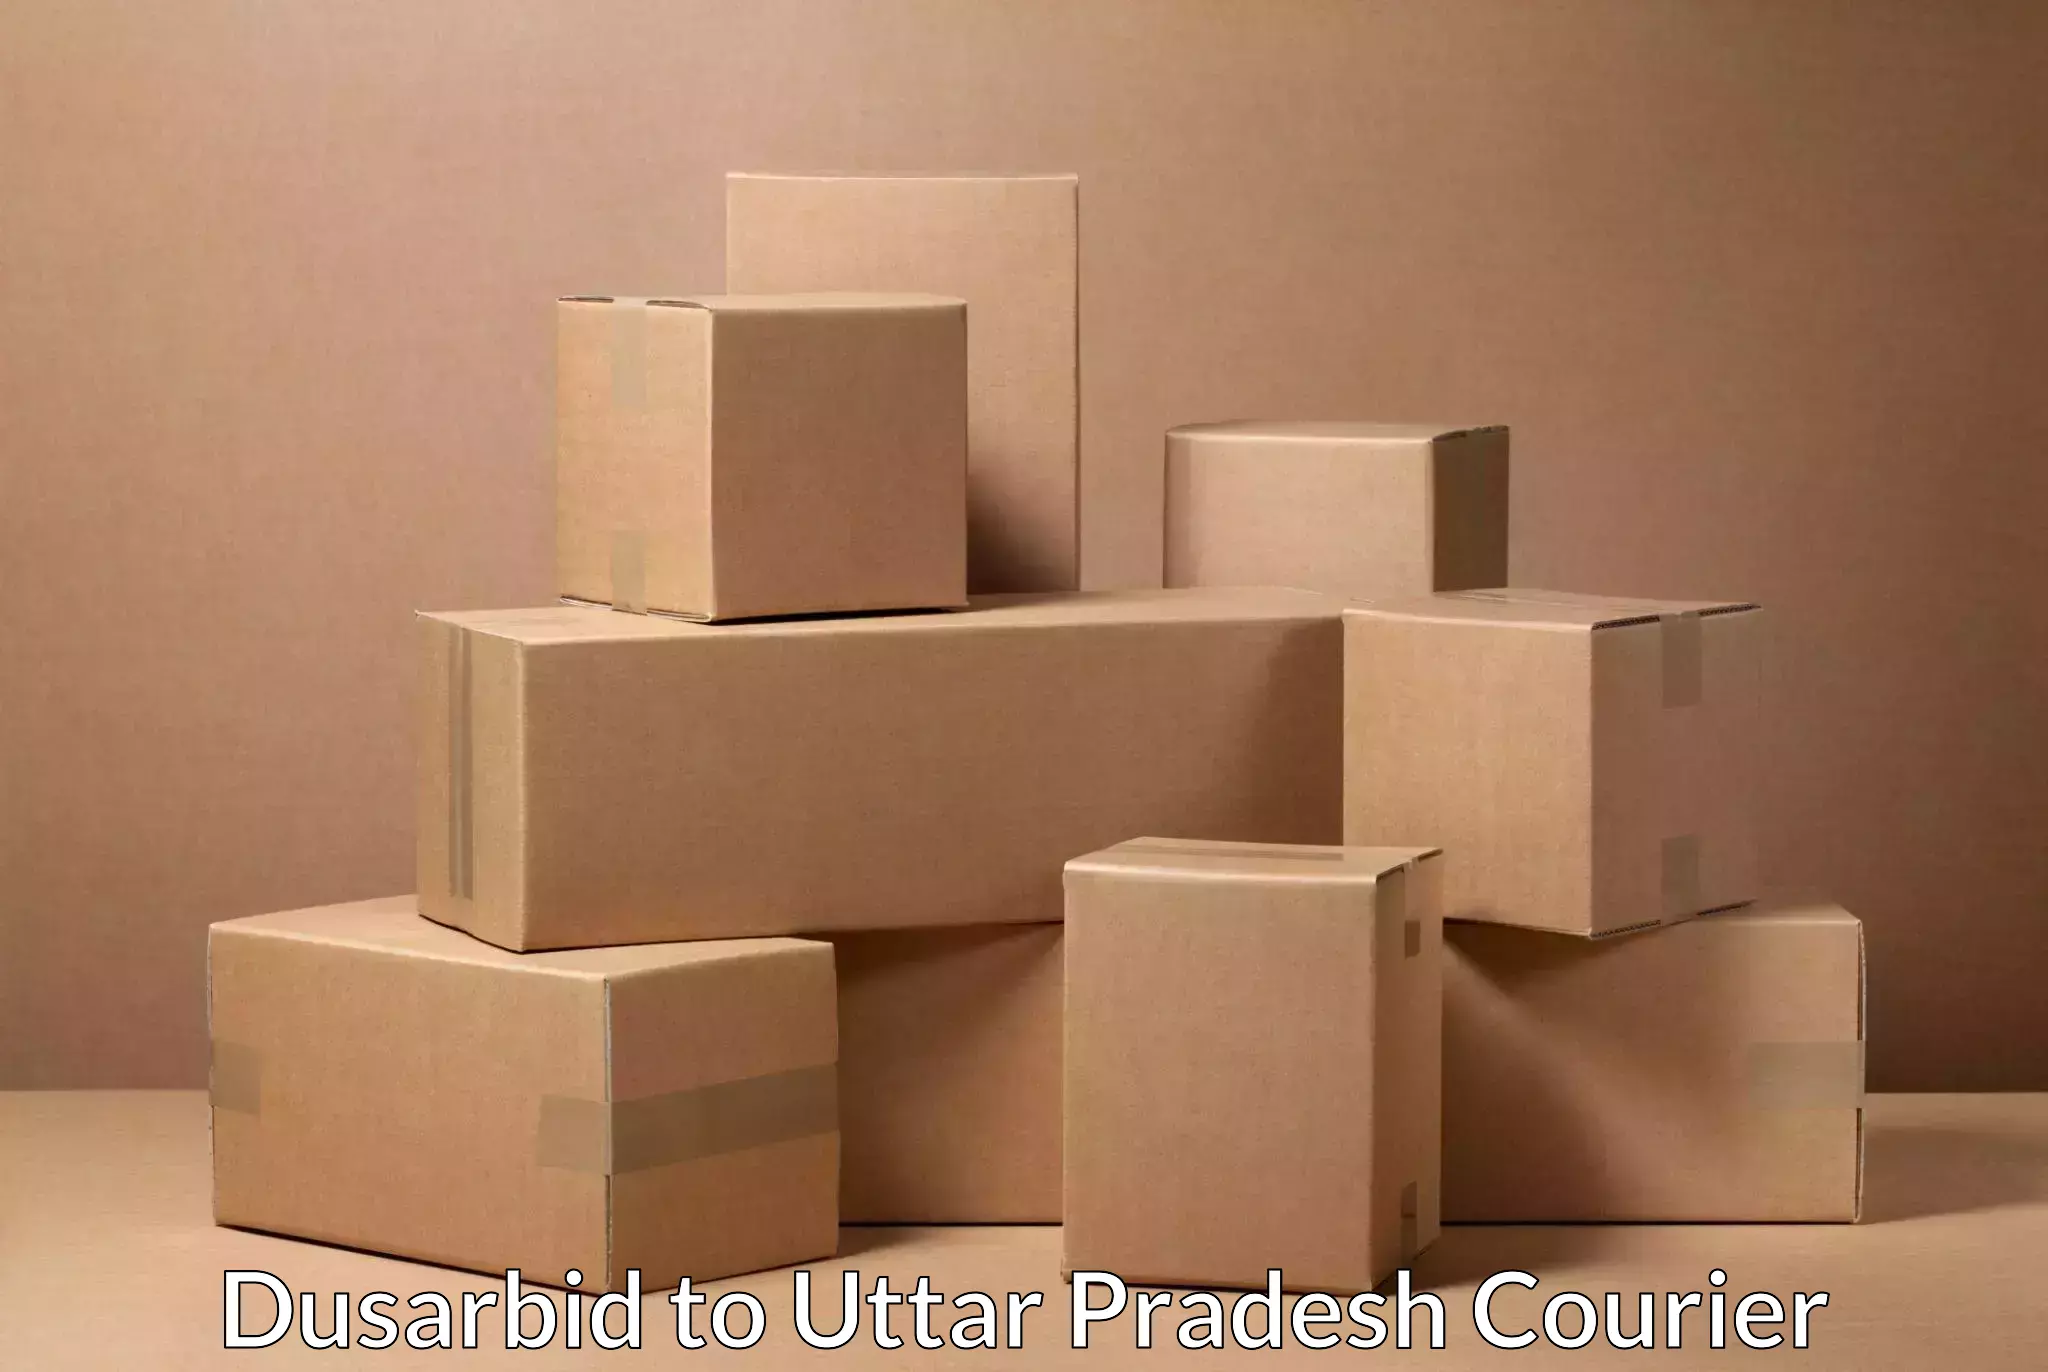 Fastest parcel delivery Dusarbid to Fatehabad Agra